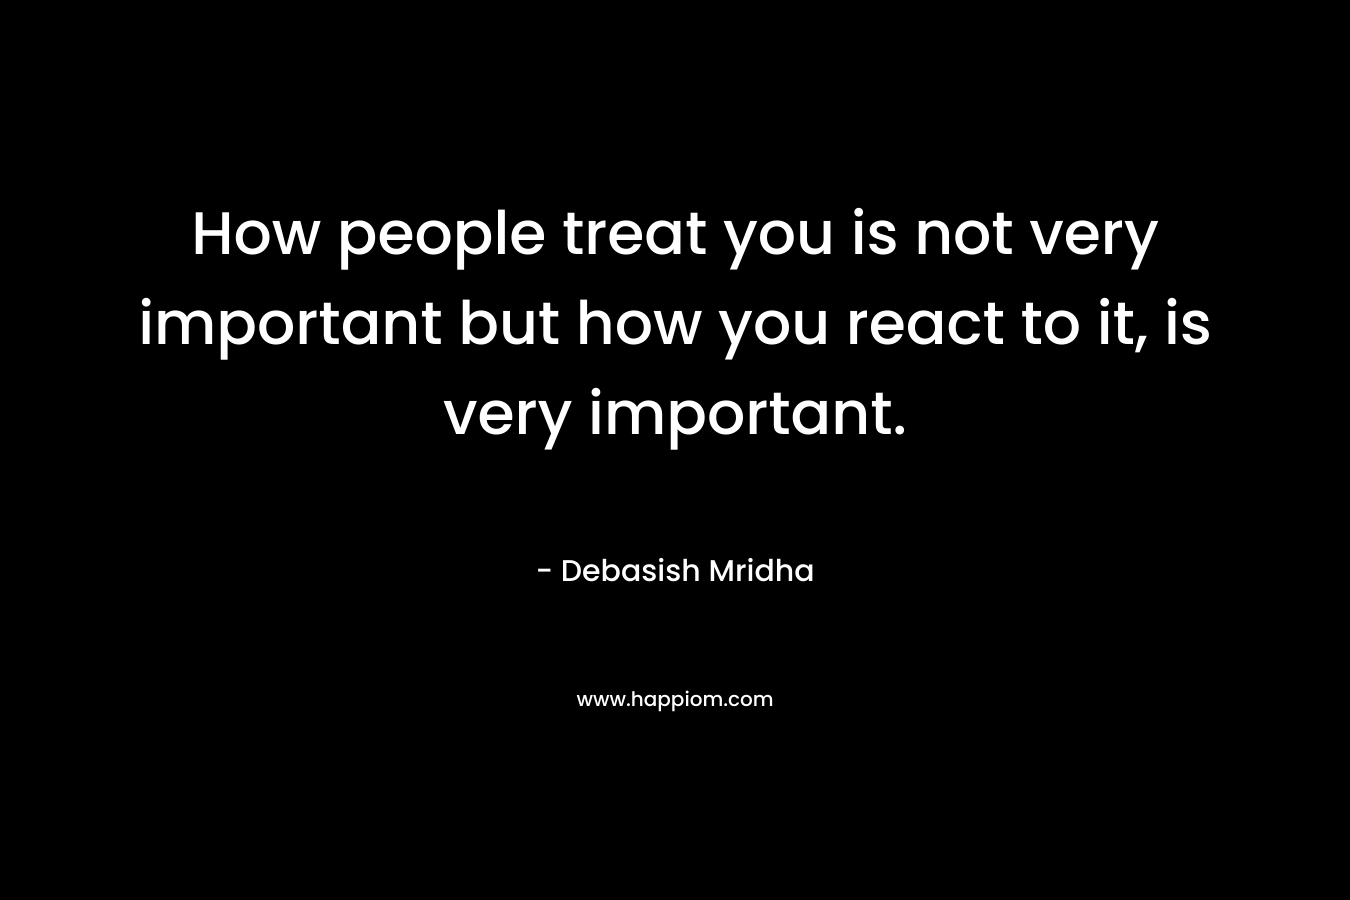 How people treat you is not very important but how you react to it, is very important. – Debasish Mridha